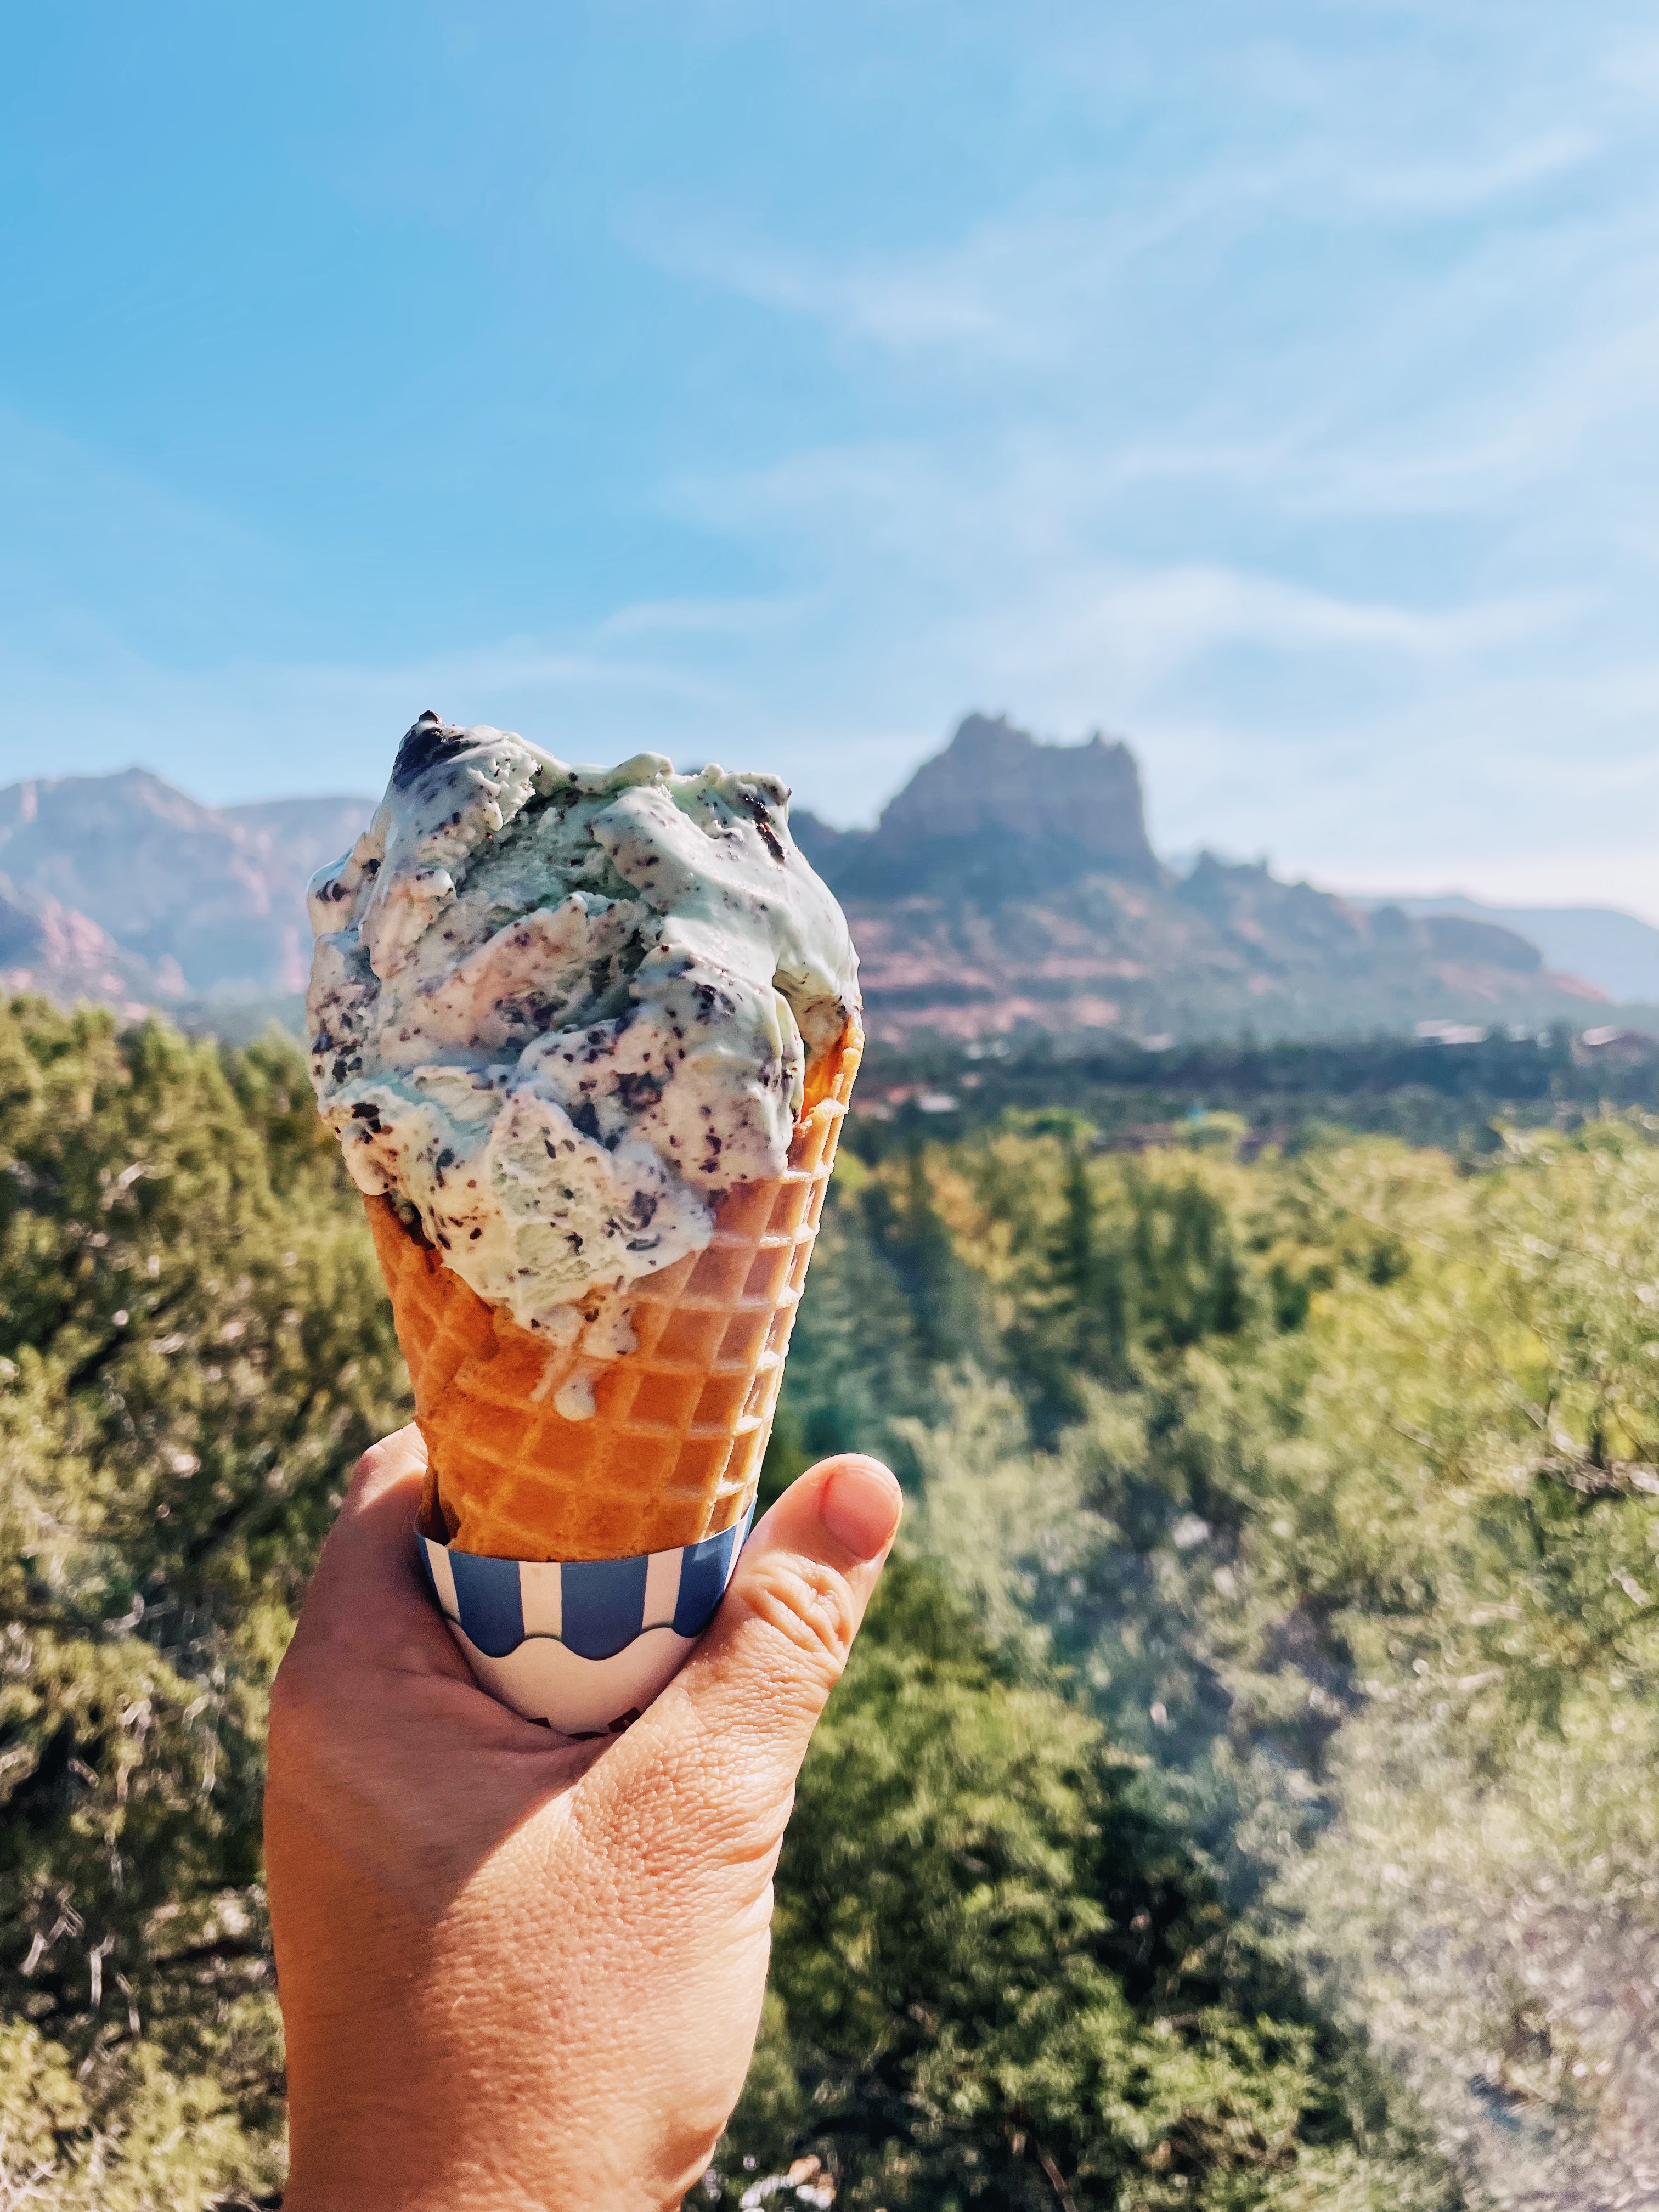 Ice cream is always important after completing an easy hike in Sedona, Arizona